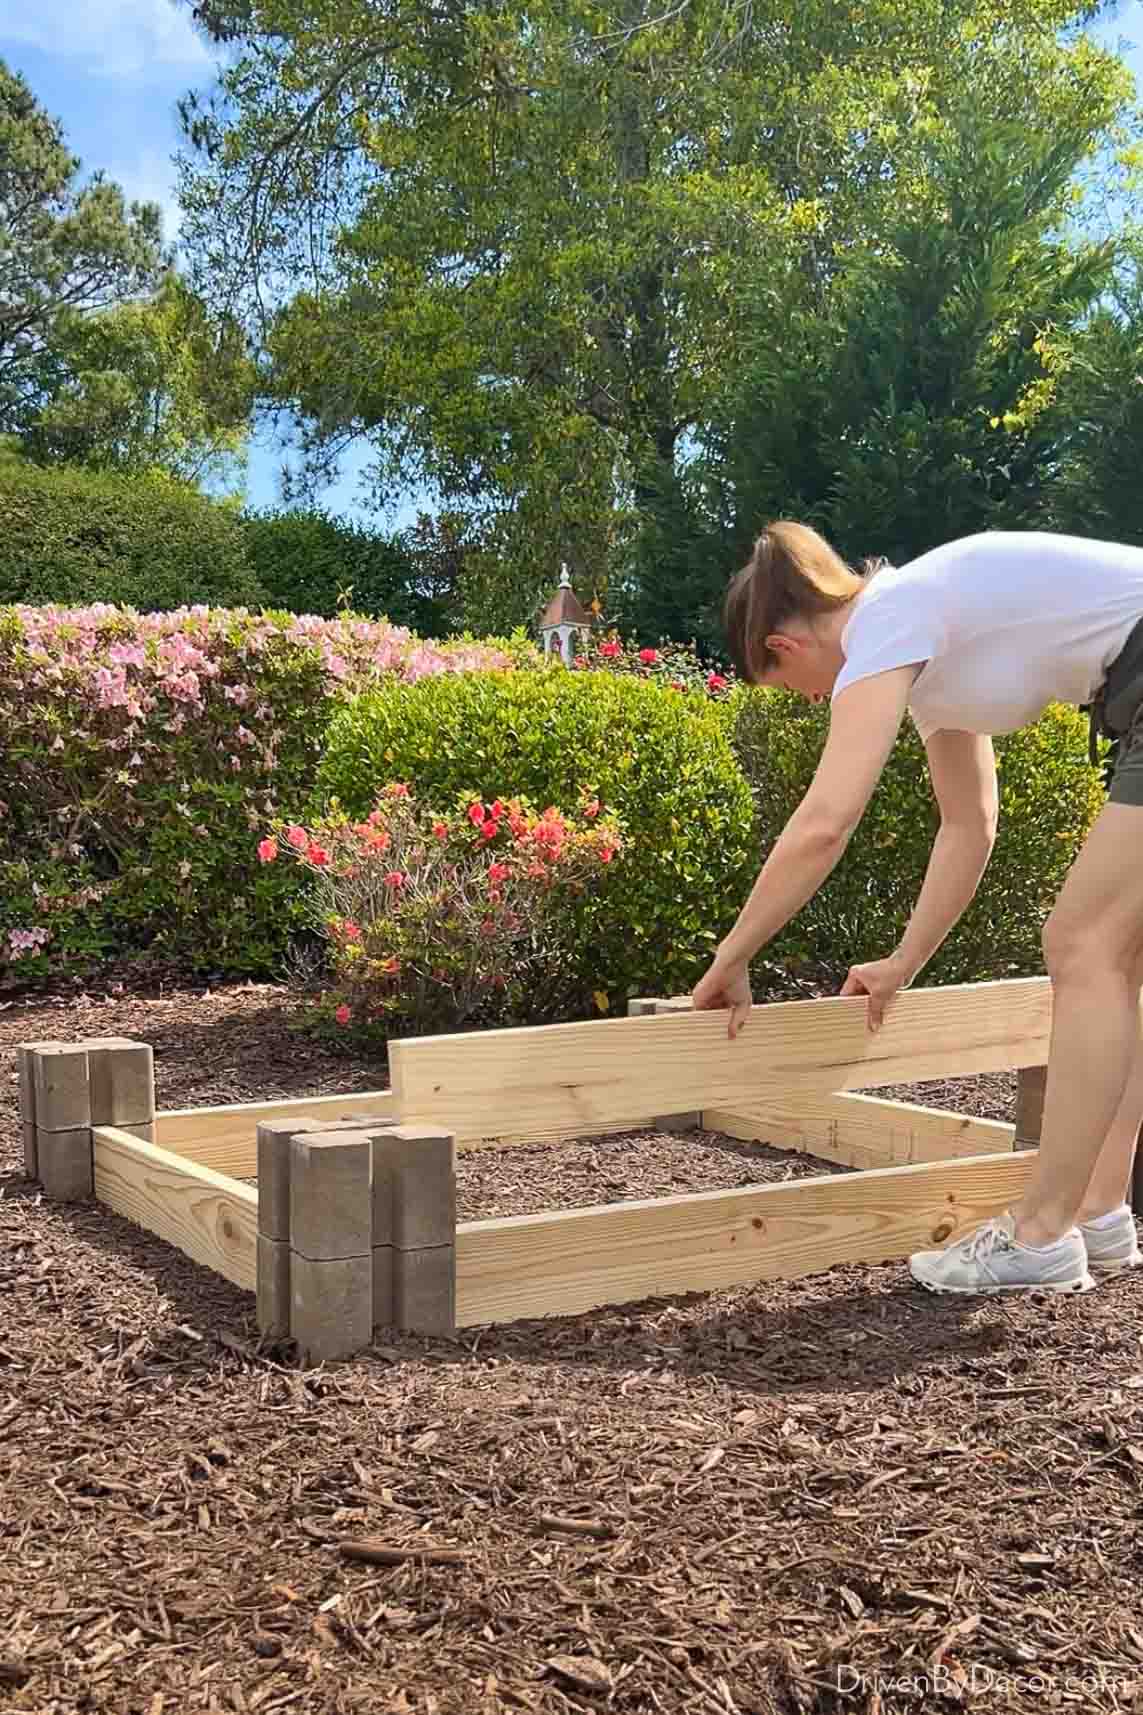 Adding a second row of boards to DIY raised garden bed